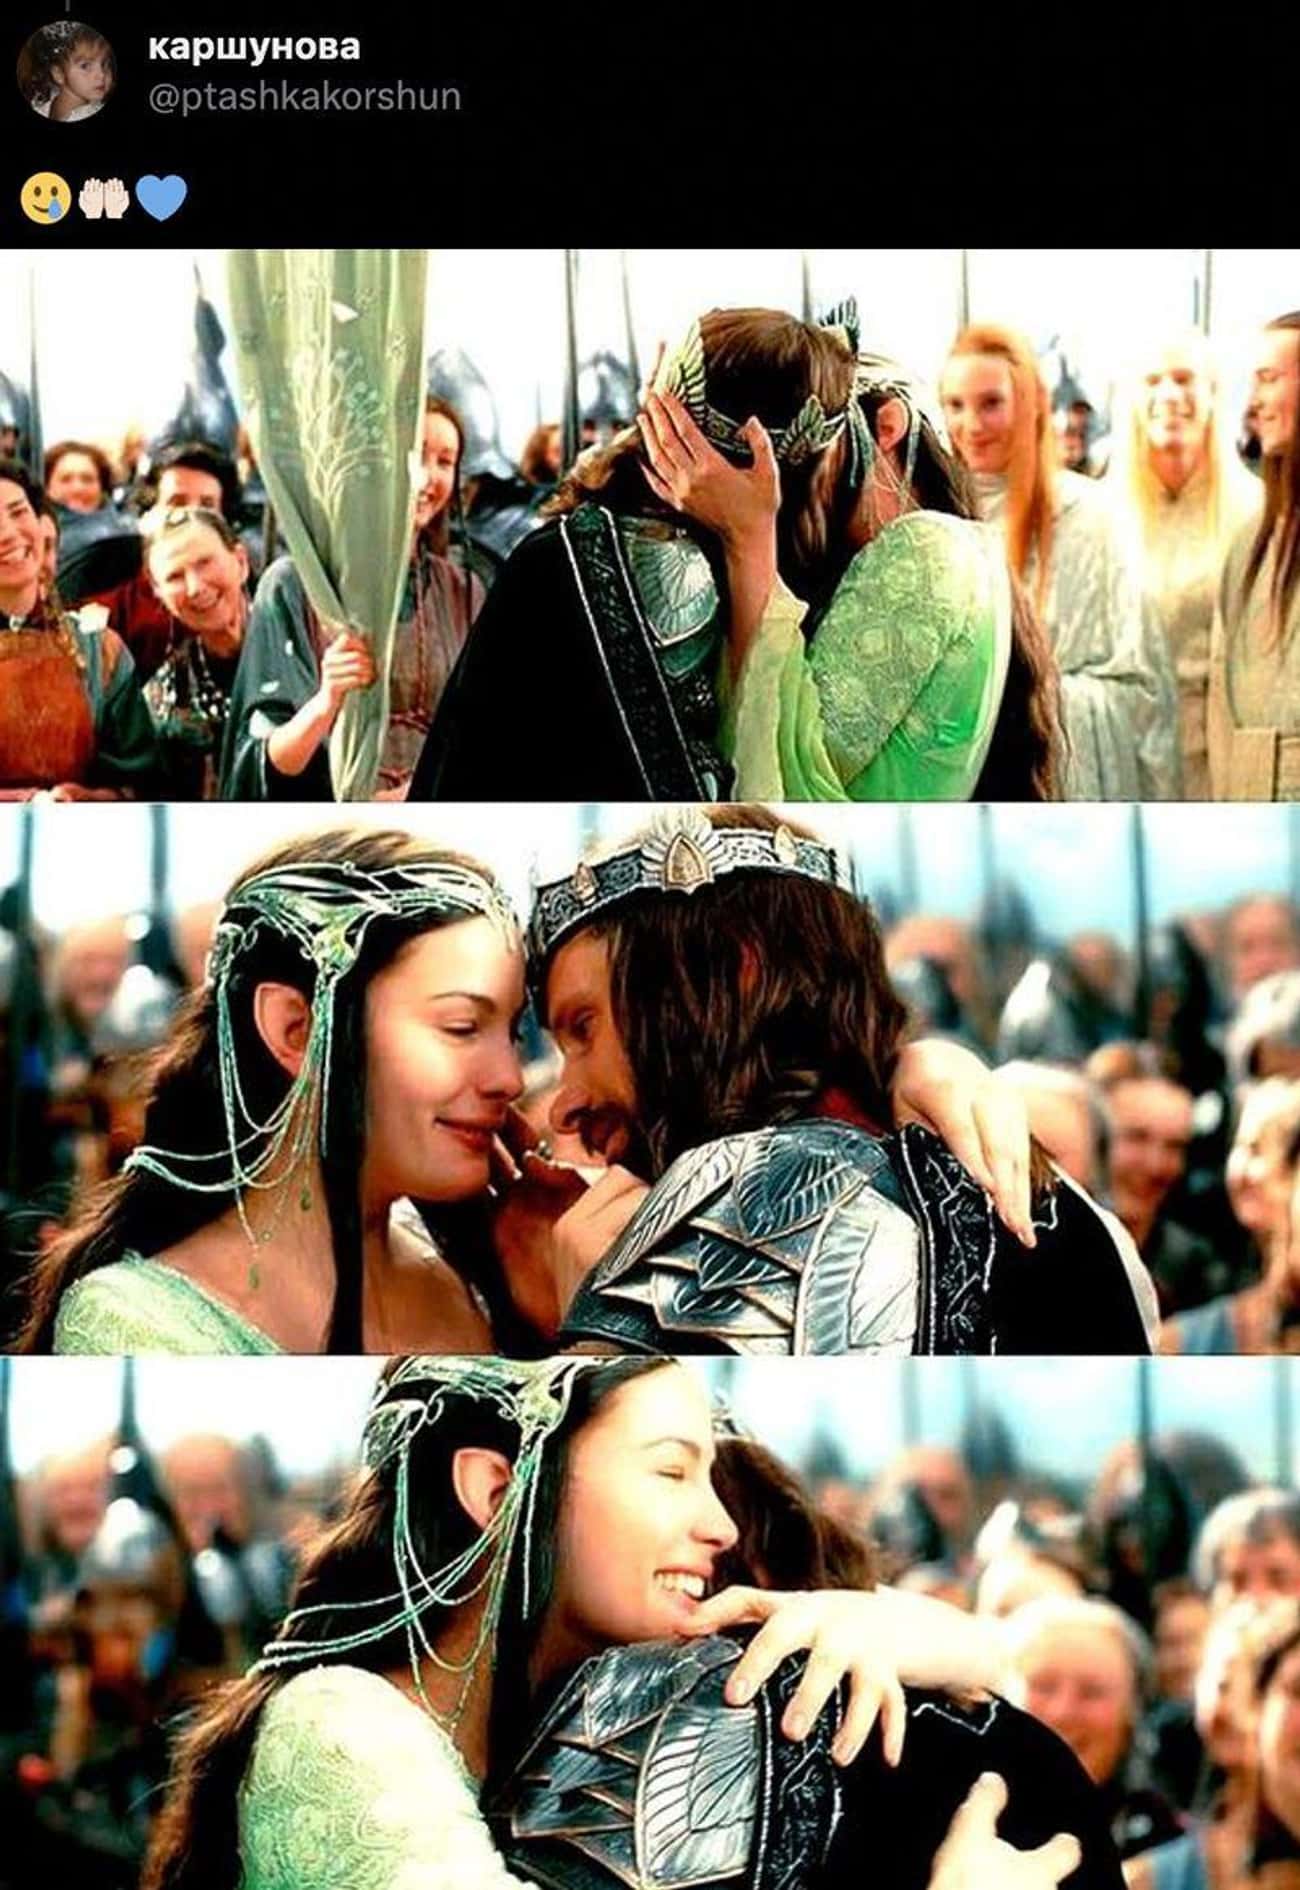 Aragorn Reunited With His Queen In 'The Lord of the Rings: The Return of the King'